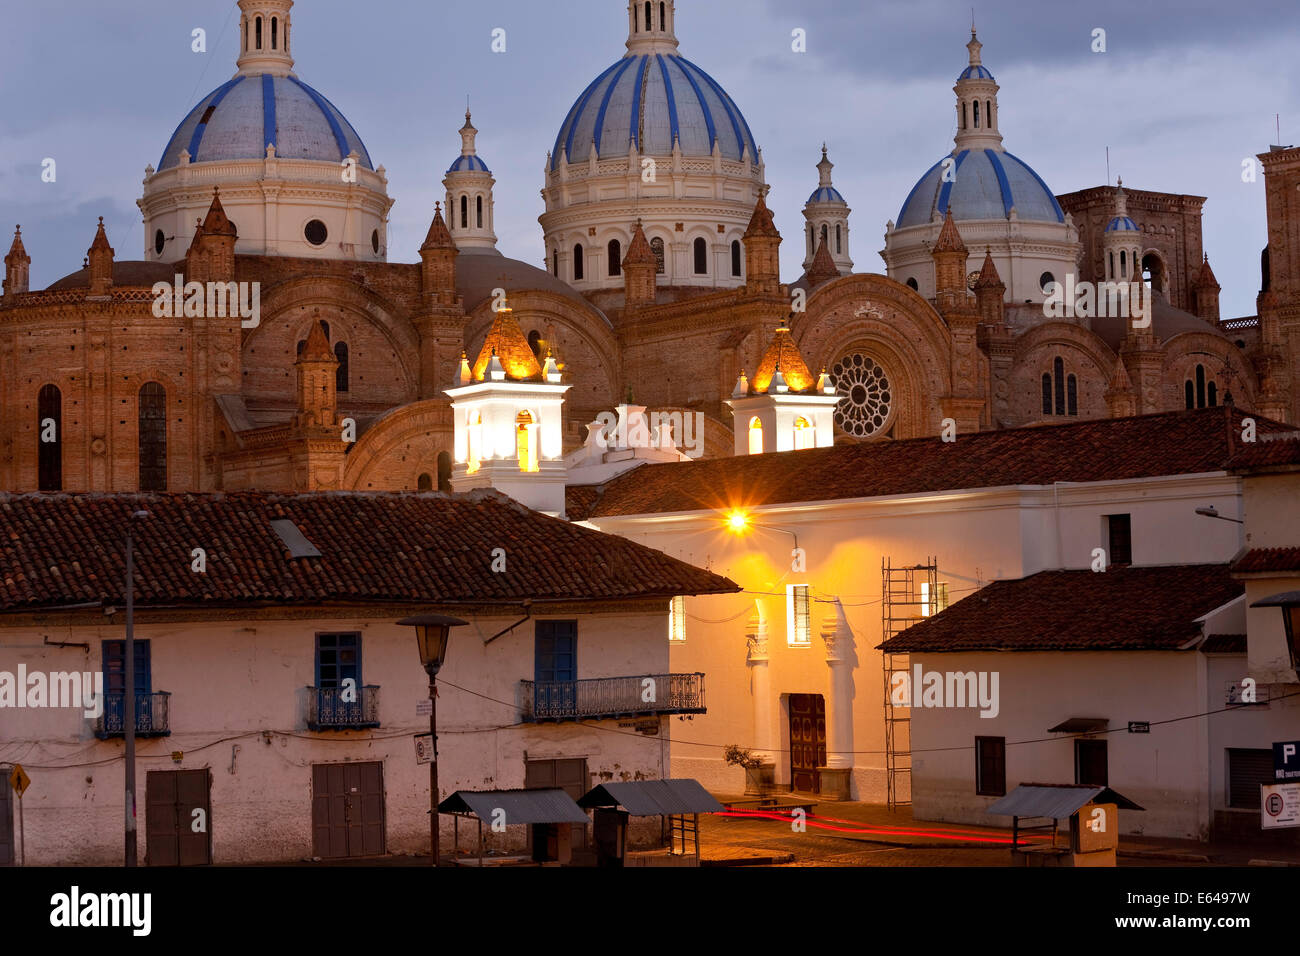 Cathedral of the Immaculate Conception, built in 1885, at dusk, Cuenca, Ecuador Stock Photo